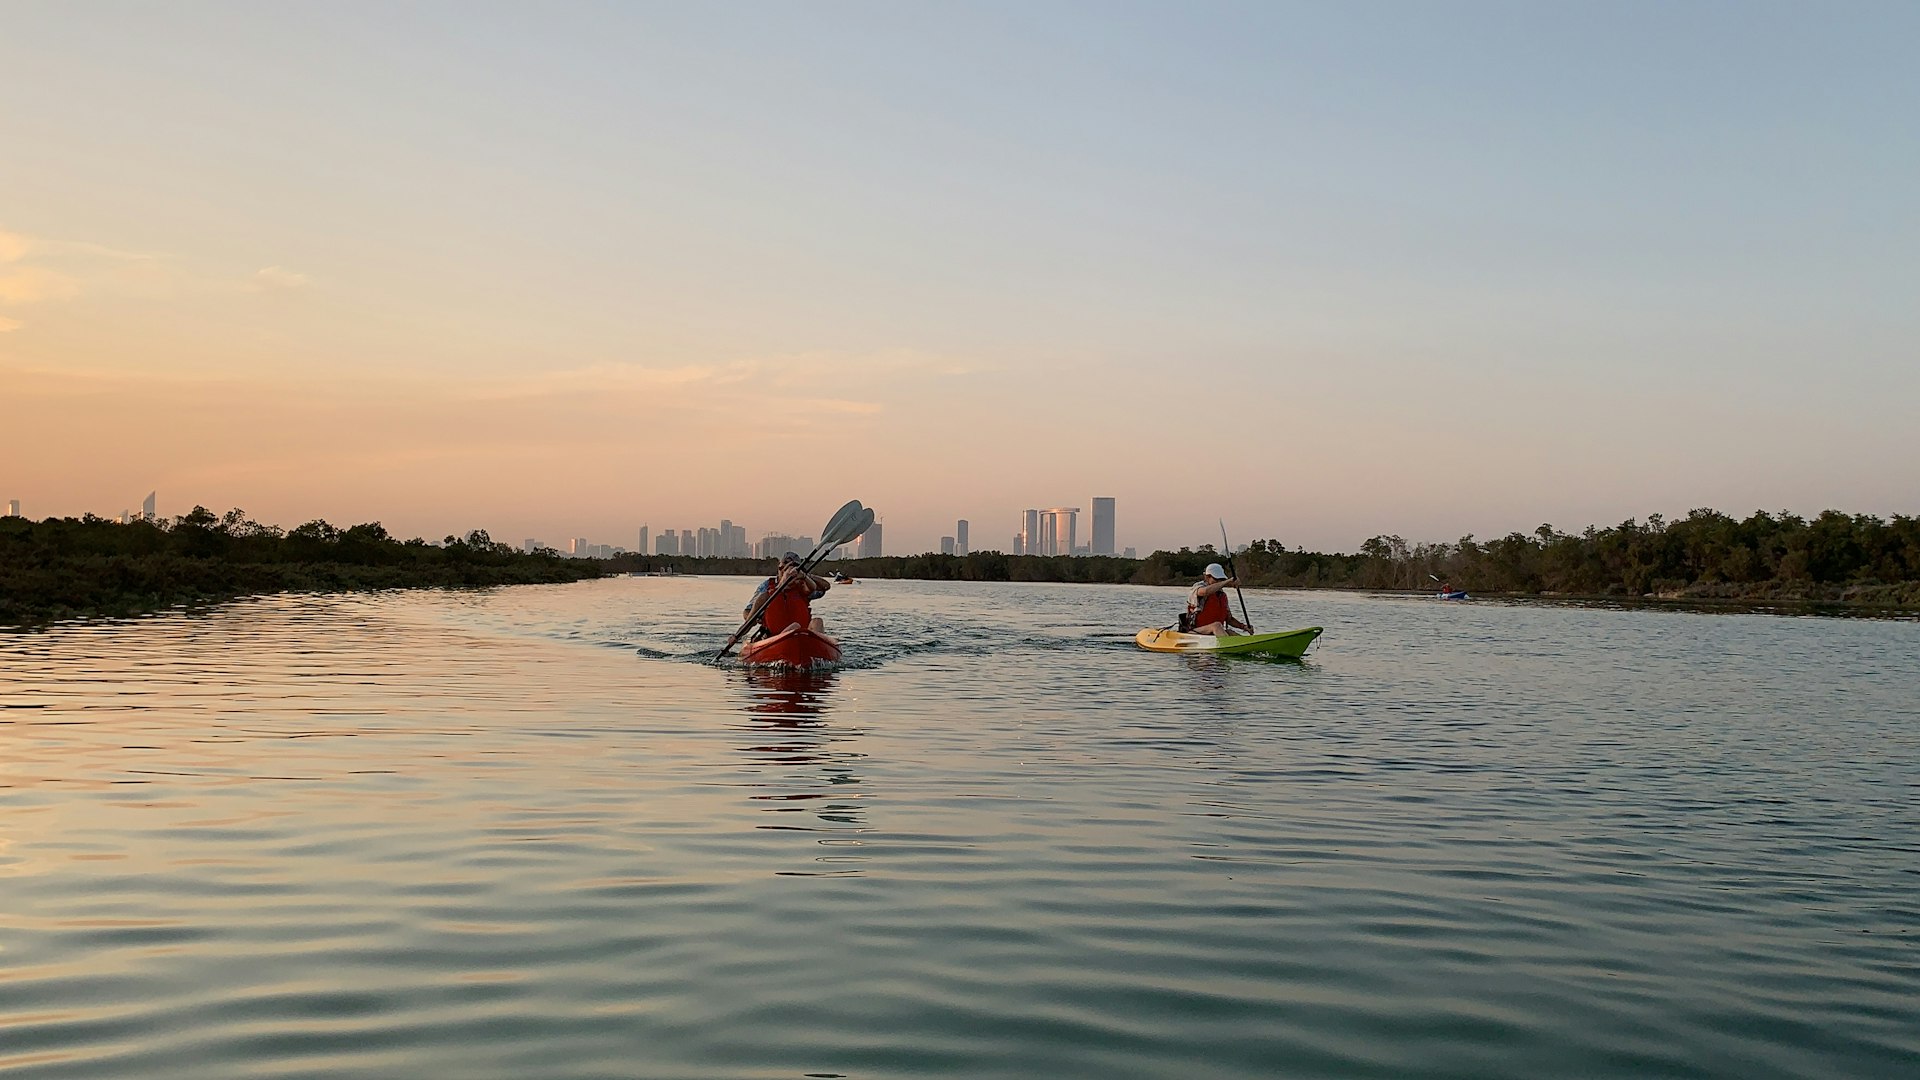 Kayakers paddle through waters surrounded by mangroves with city skyscrapers in the distance